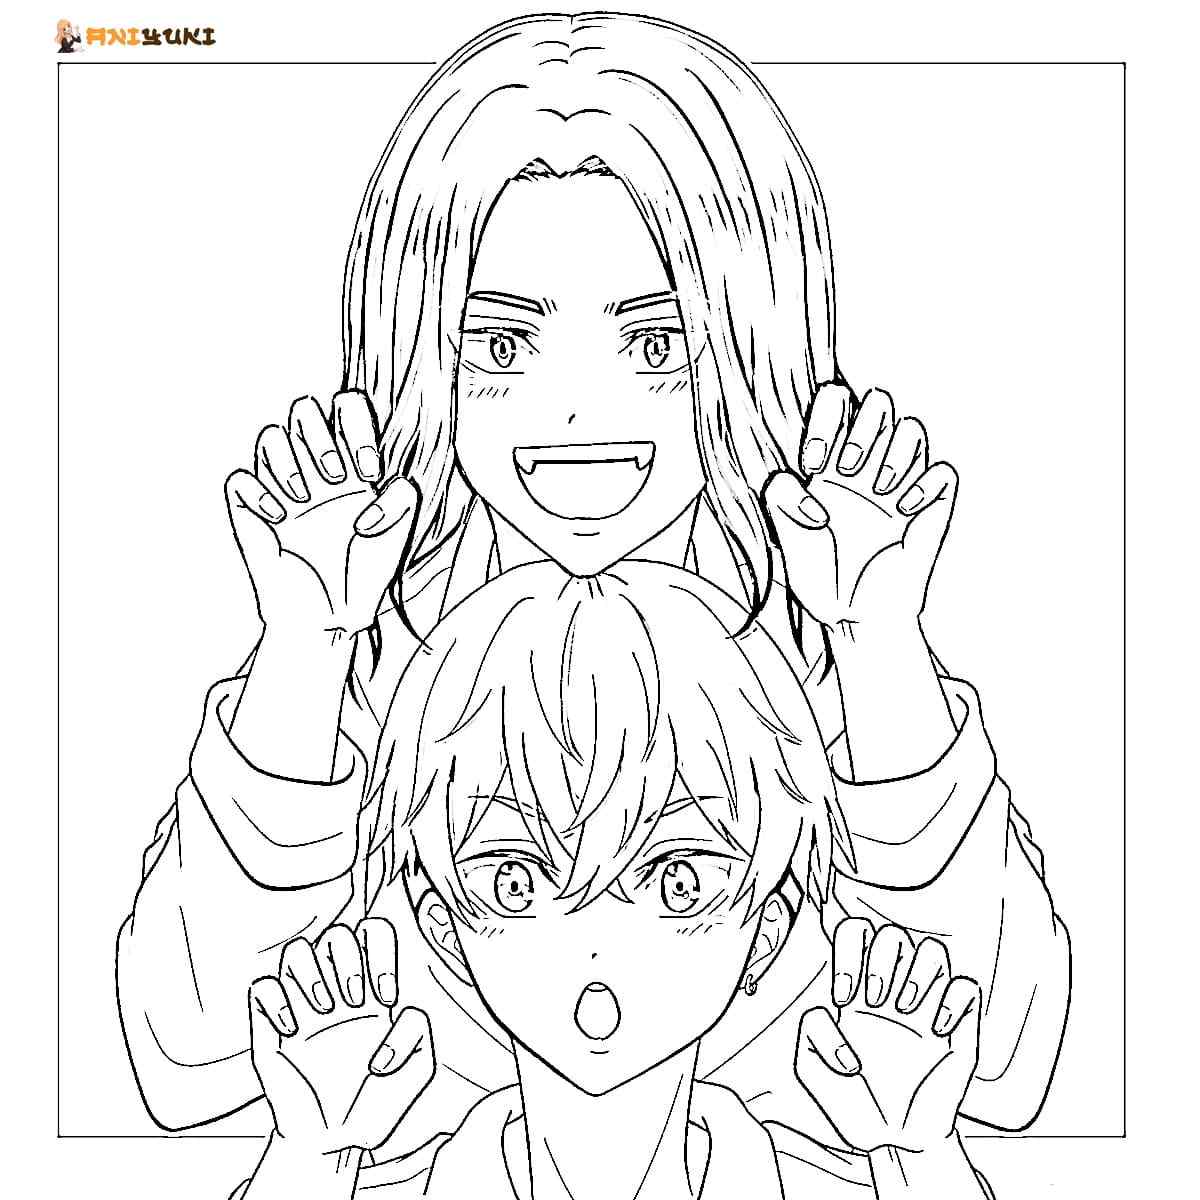 Two Anime Boys Smiling Coloring Pages   Coloring Cool